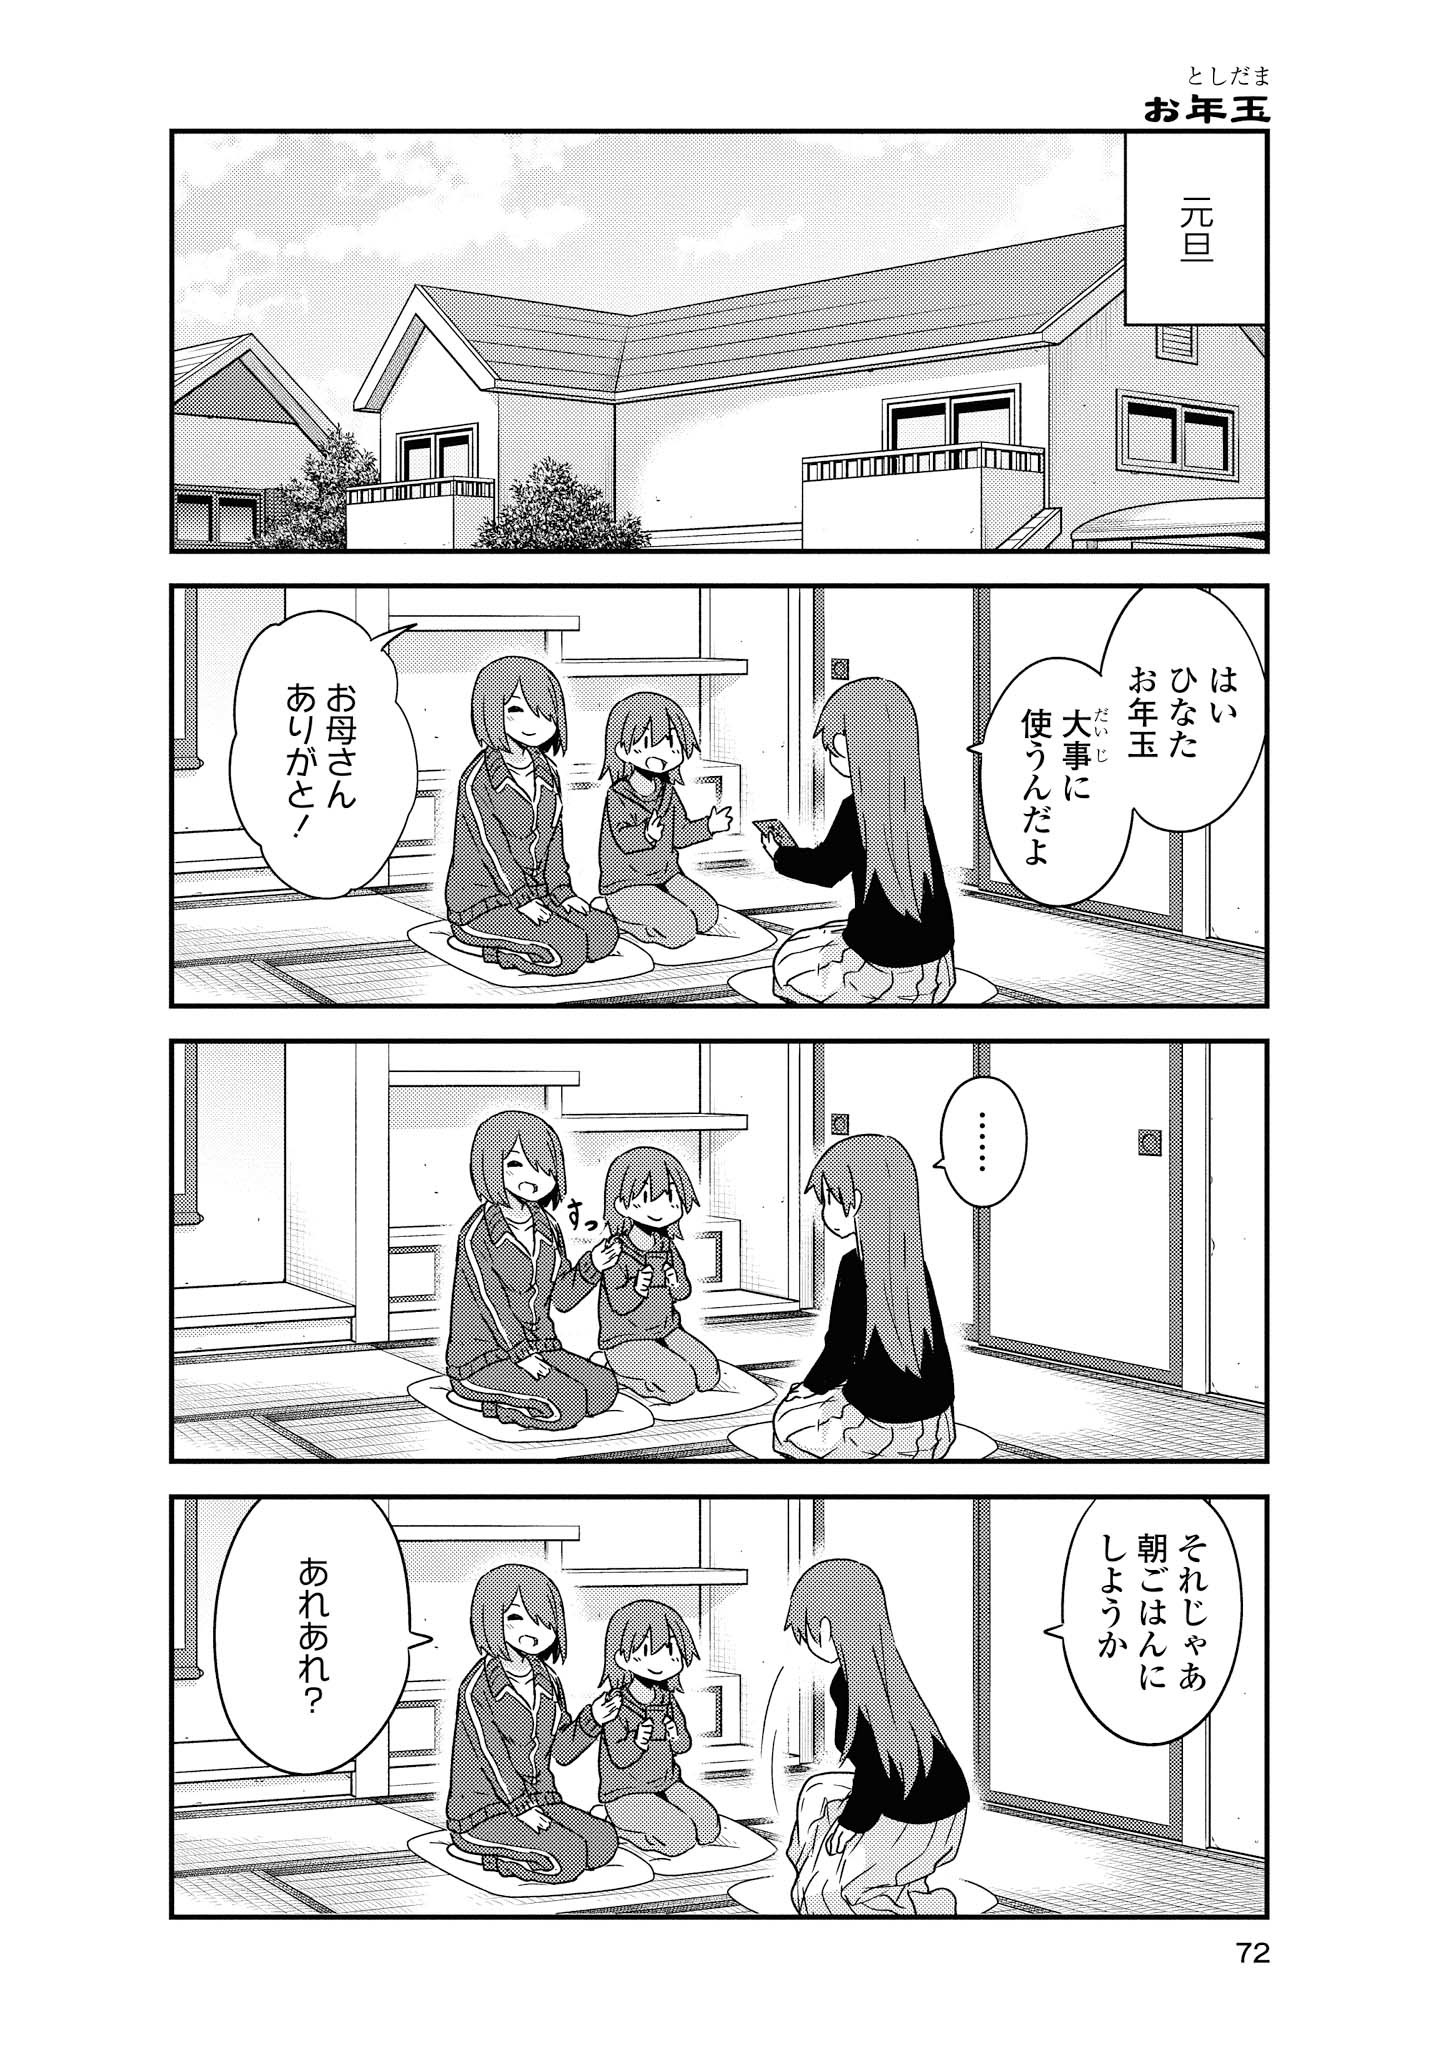 Wataten! An Angel Flew Down to Me 私に天使が舞い降りた！ 第48話 - Page 2